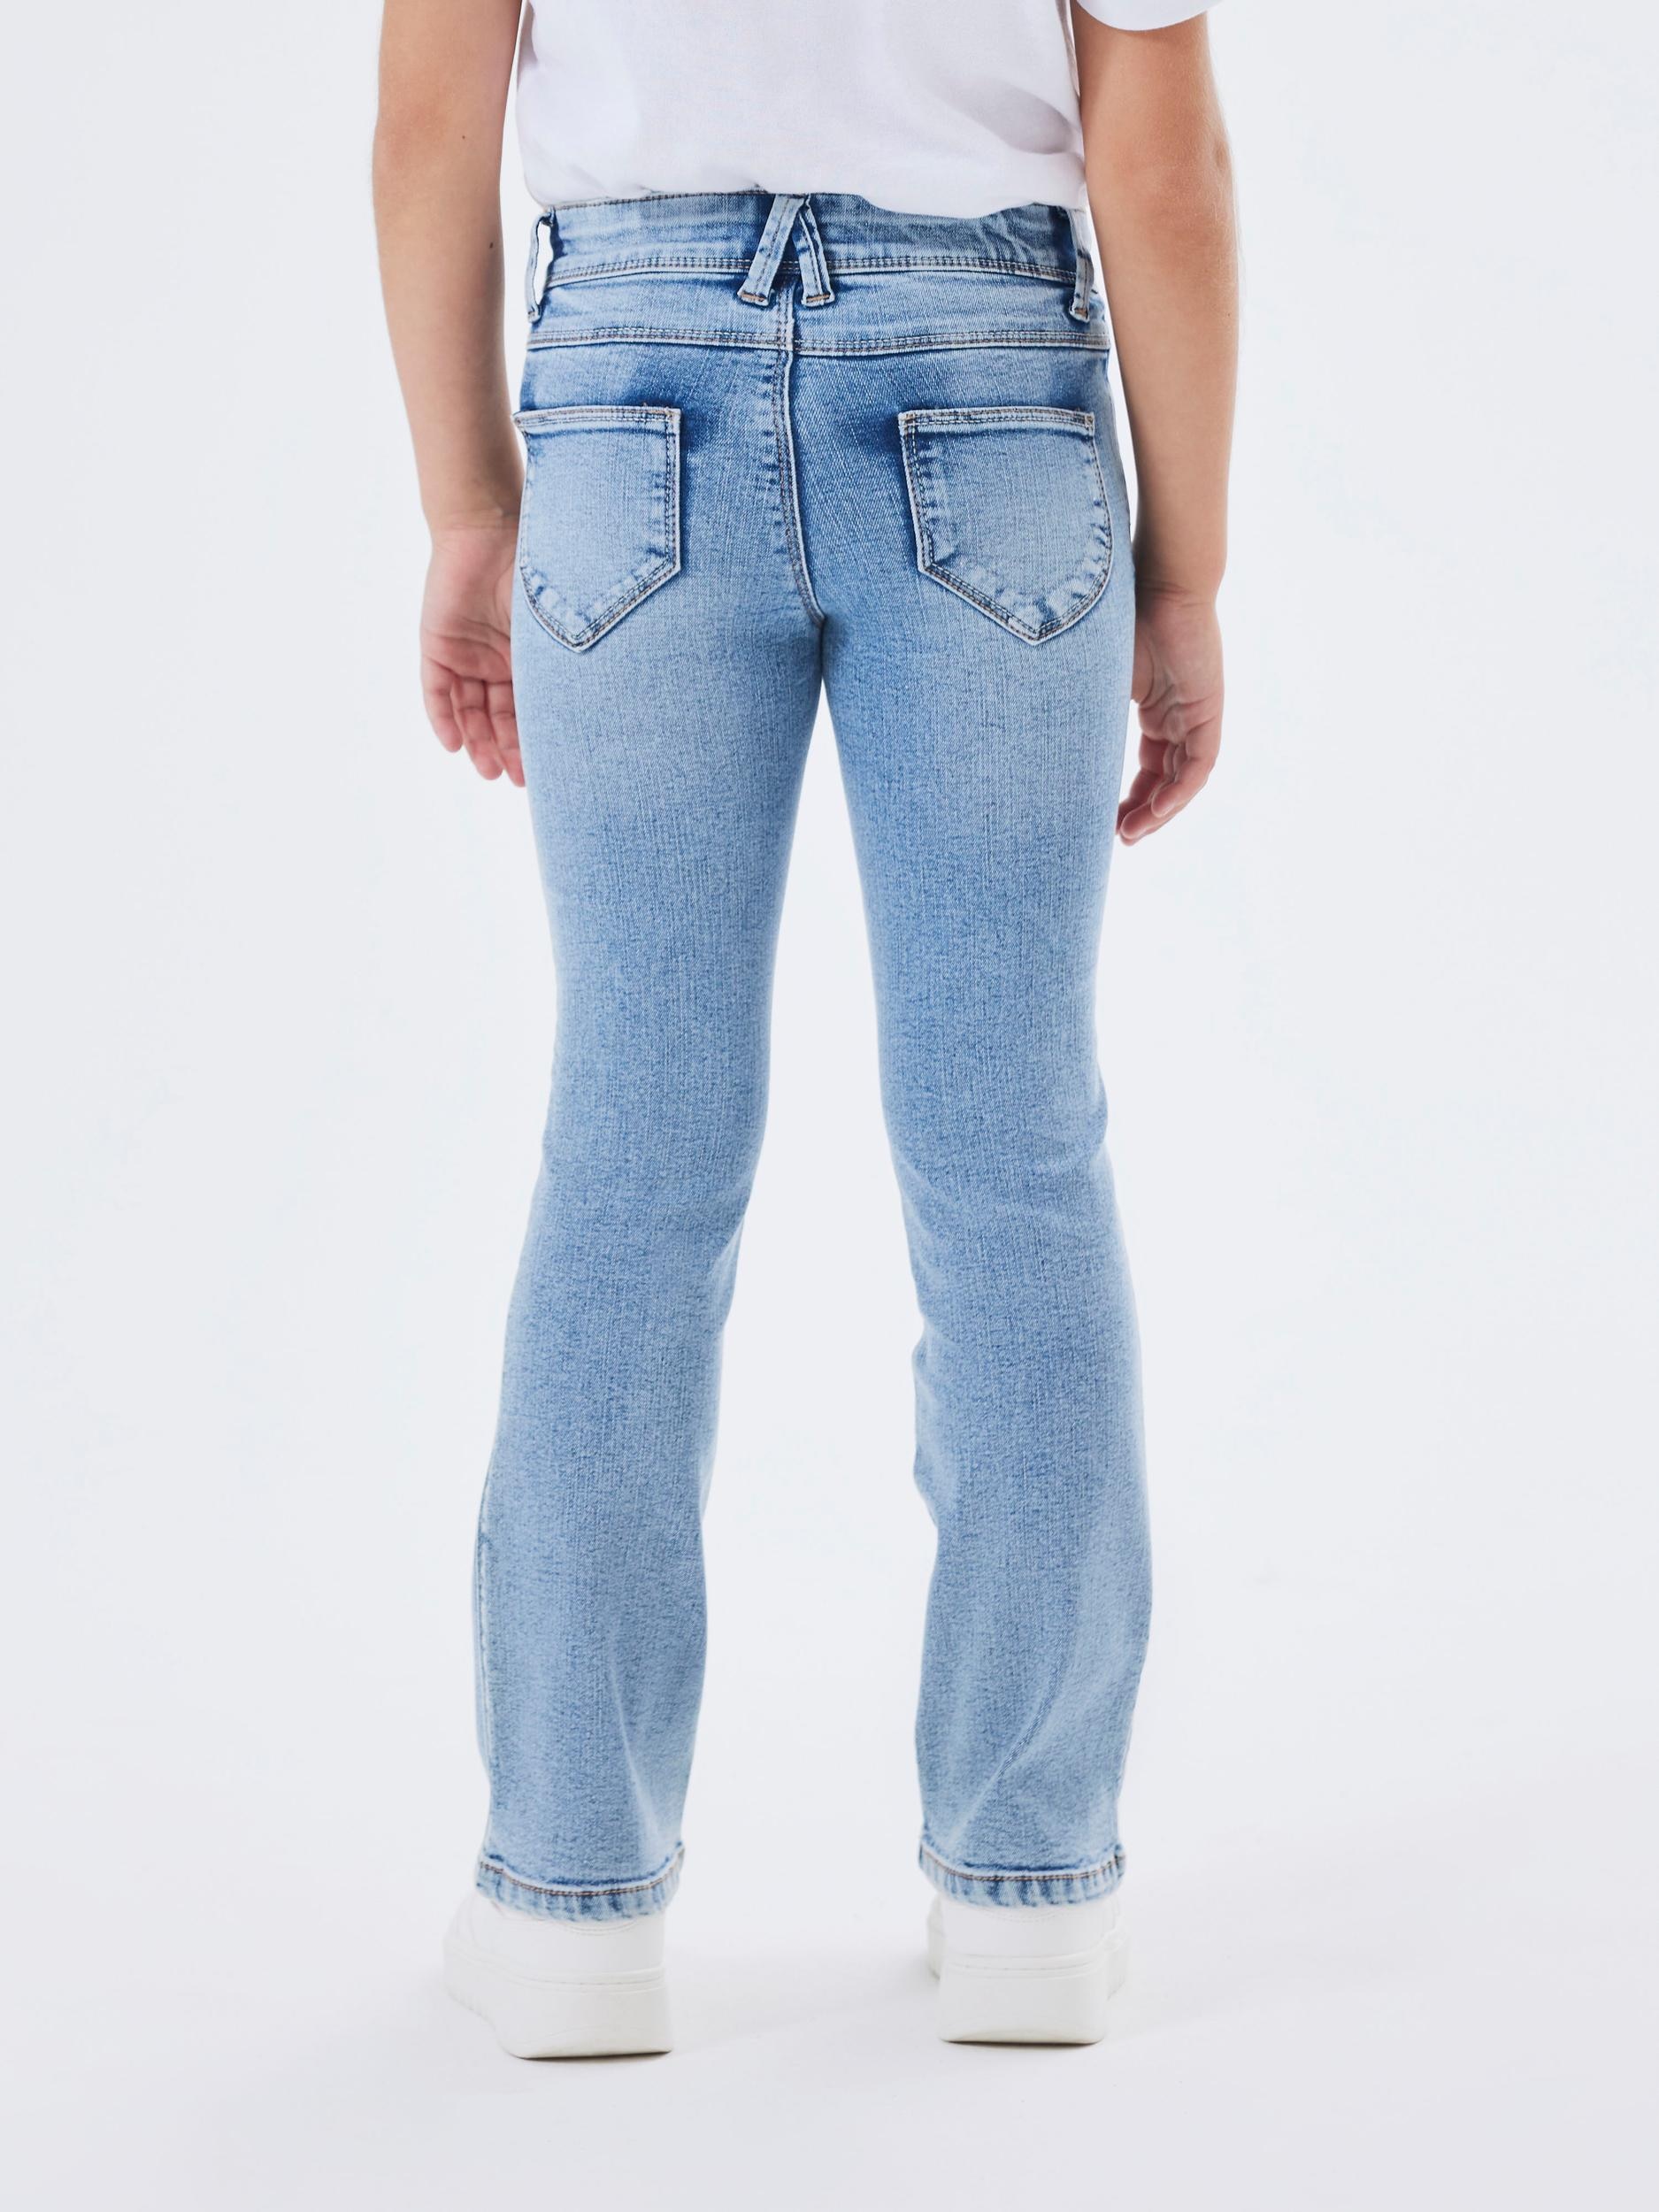 SKINNY Name »NKFPOLLY BOOT It Stretch bei mit kaufen JEANS Bootcut-Jeans OTTO NOOS«, 1142-AU